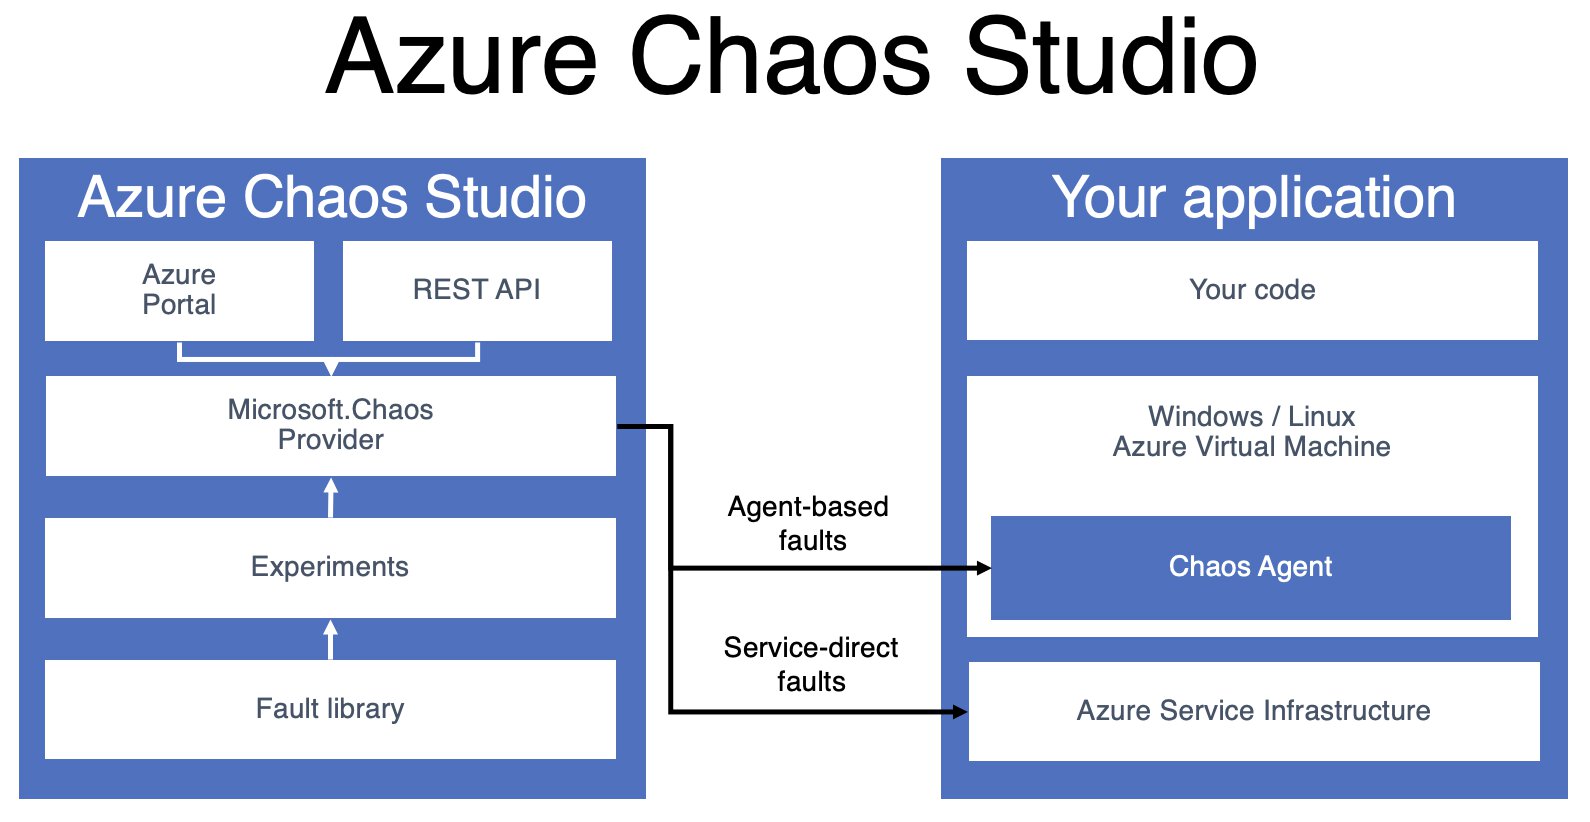 Image showing where Azure Chaos Studio fits in your application stack. Chaos Studio supports two types of faults: service-direct faults and agent-based faults.